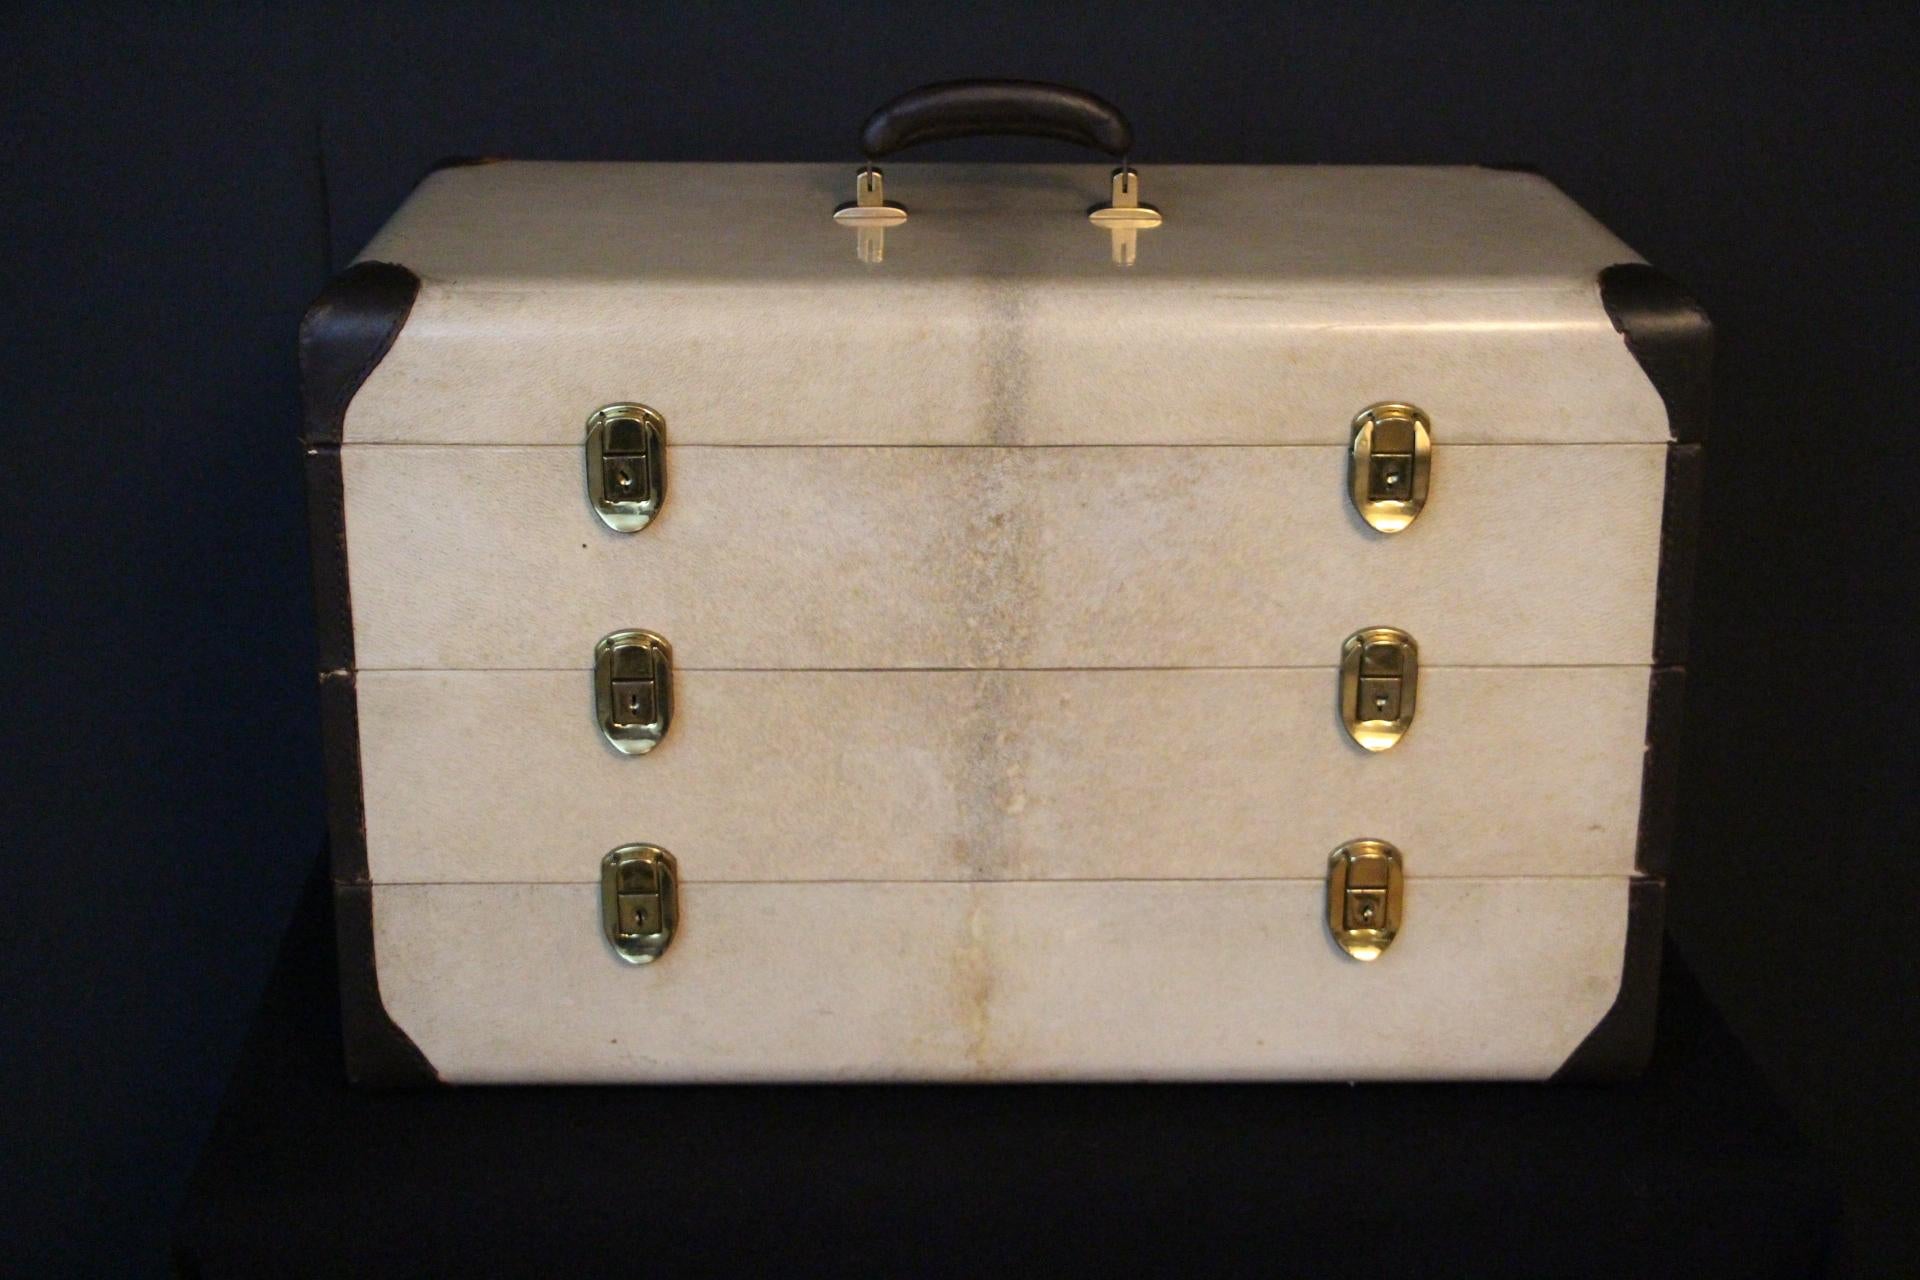 This little steamer trunk is so extraordinary...All made in soft ivory color vellum leather with chocolate color leather trim and matching sturdy top handle, it splits into 3 removable sections. Its back is perfectly identical to its front. Indeed,